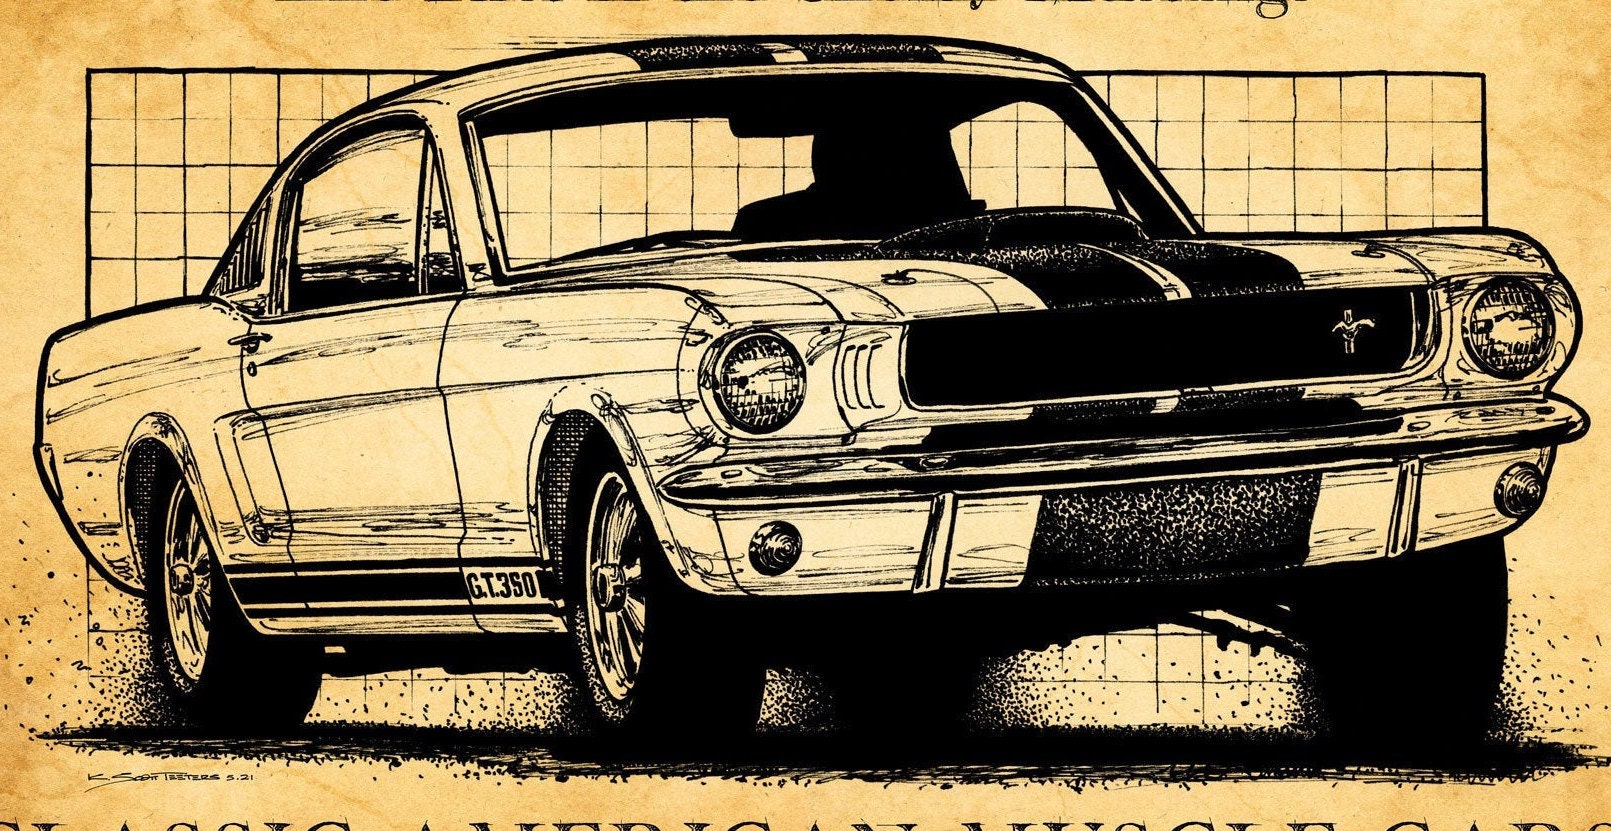 1965 Shelby GT350 Canvas Poster Art Print, Shelby Mustang, Size 12x18,  16x24, Man Cave Art, Car Guy Art, Garage Art, Ford Shelby Canvas Wrap 